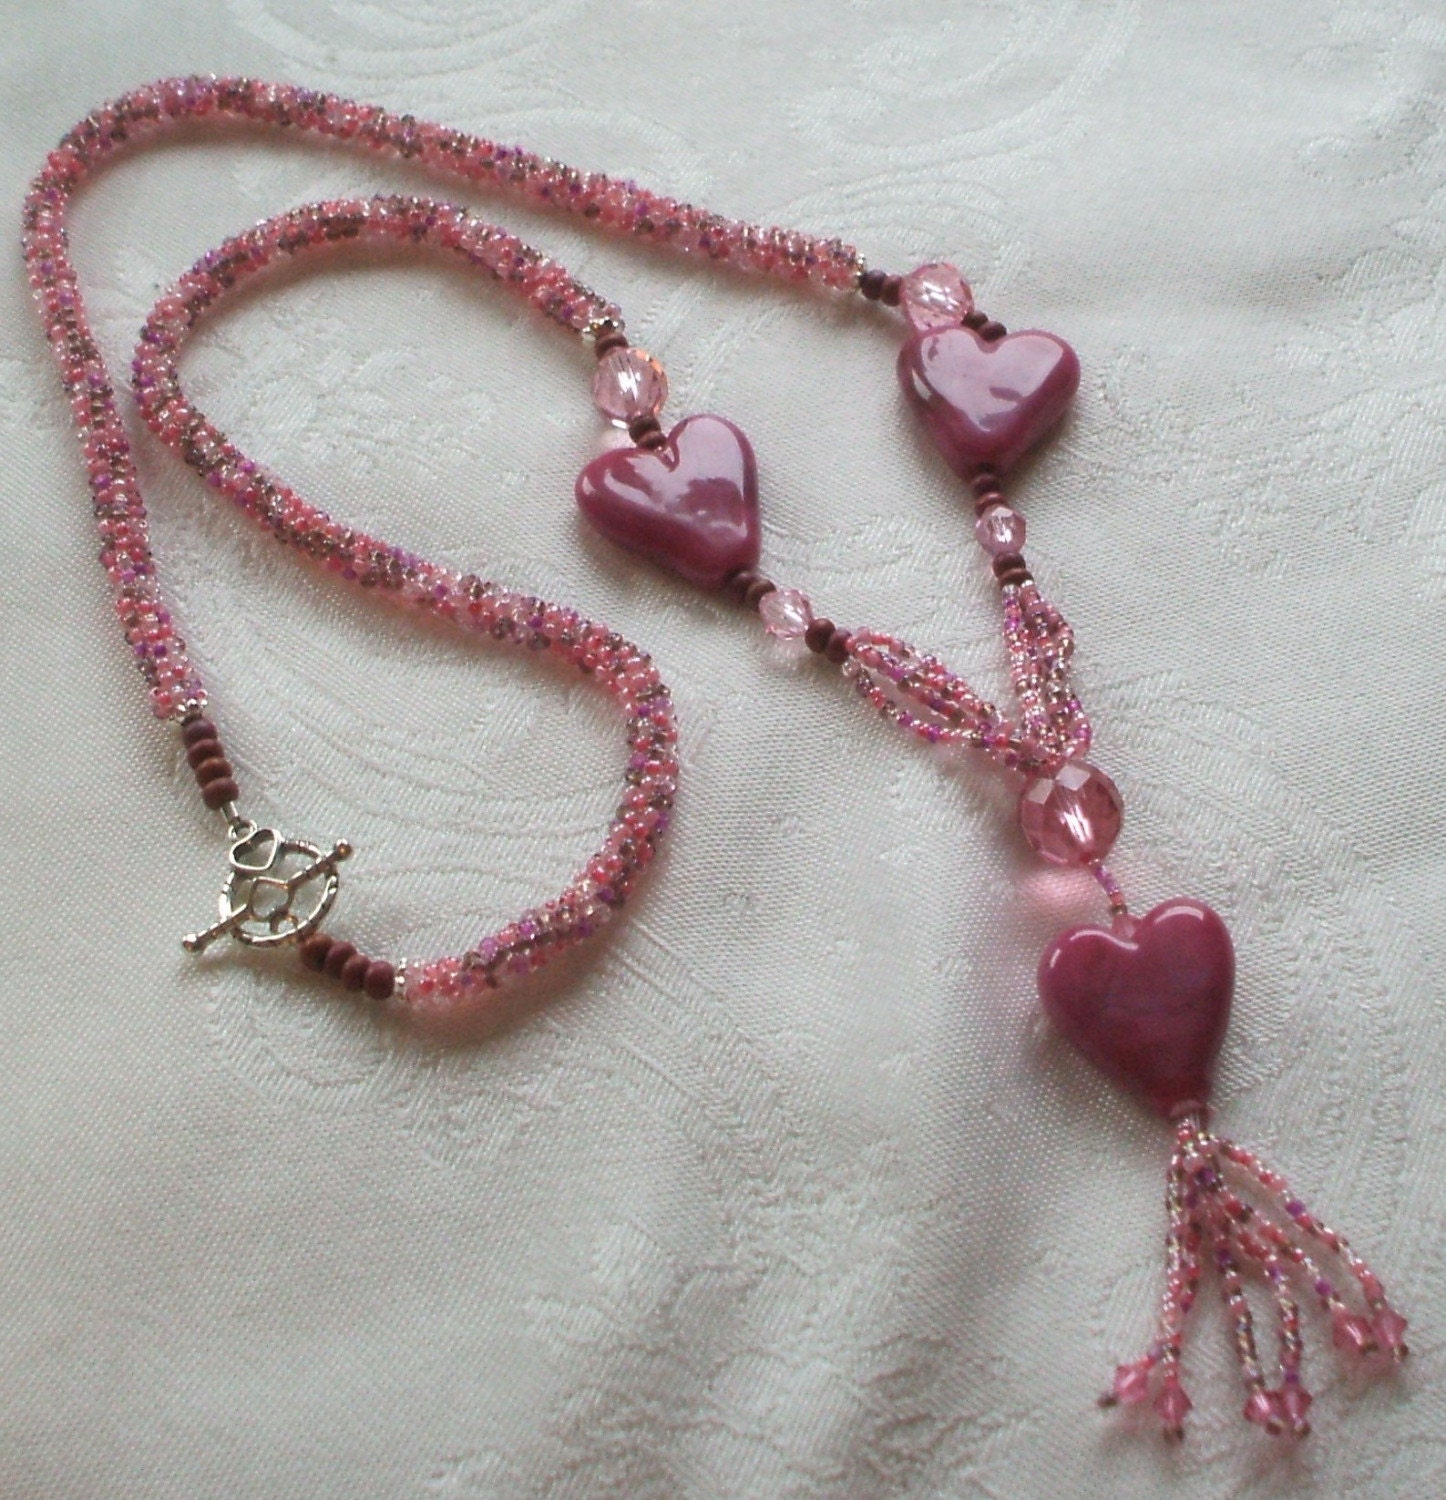 Here's My Heart Lampwork and Beadwoven Necklace